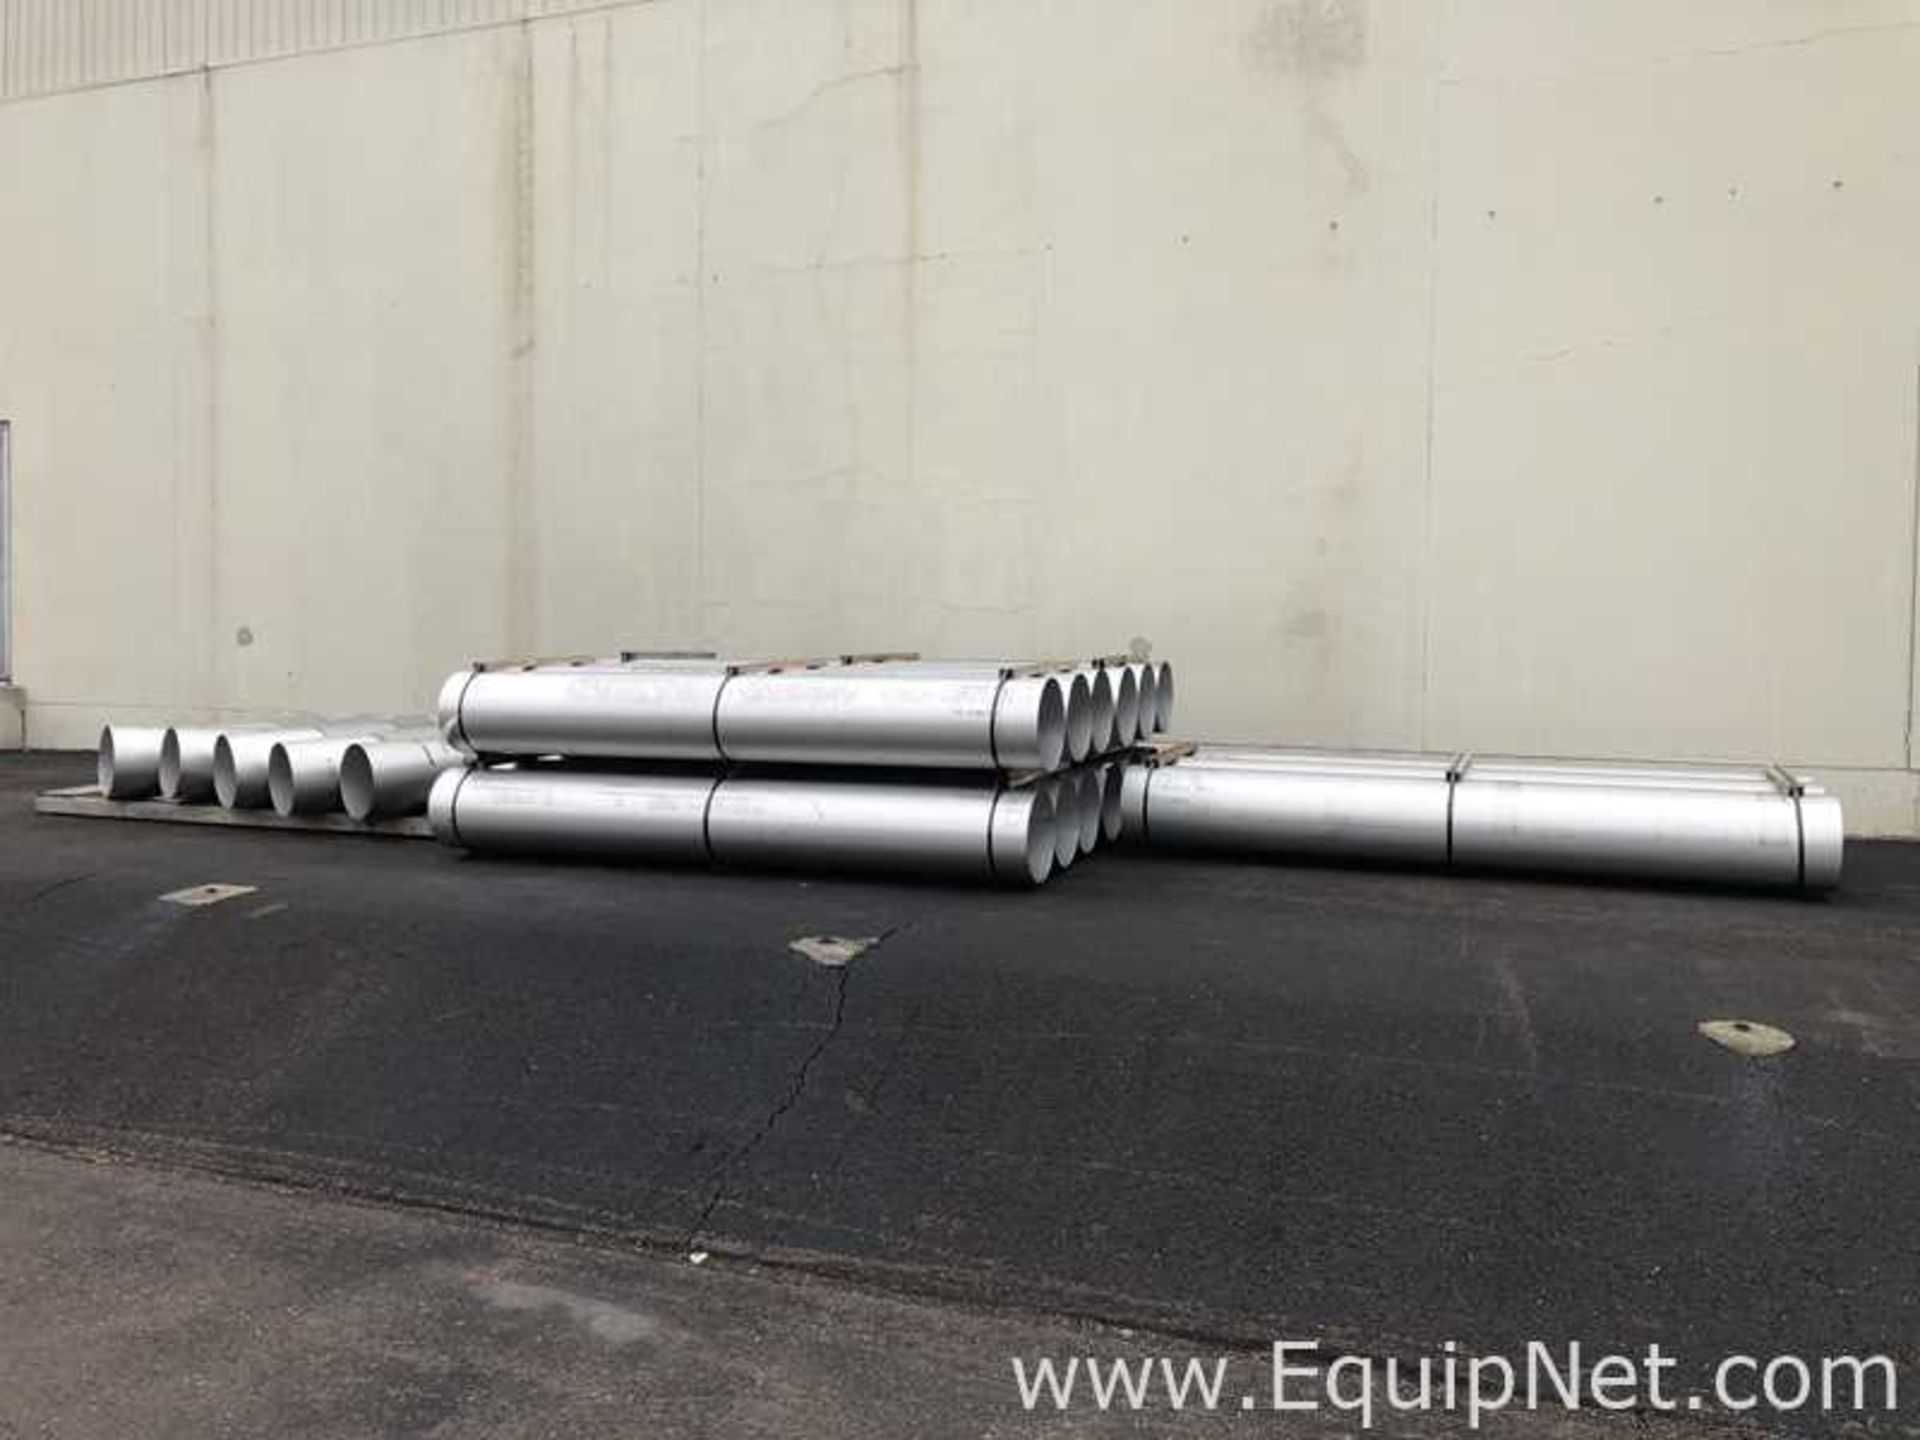 Lot Of Approx 15 Stainless Steel 304L Piping 16in diam X 150in Length Sections And Semi Elbows